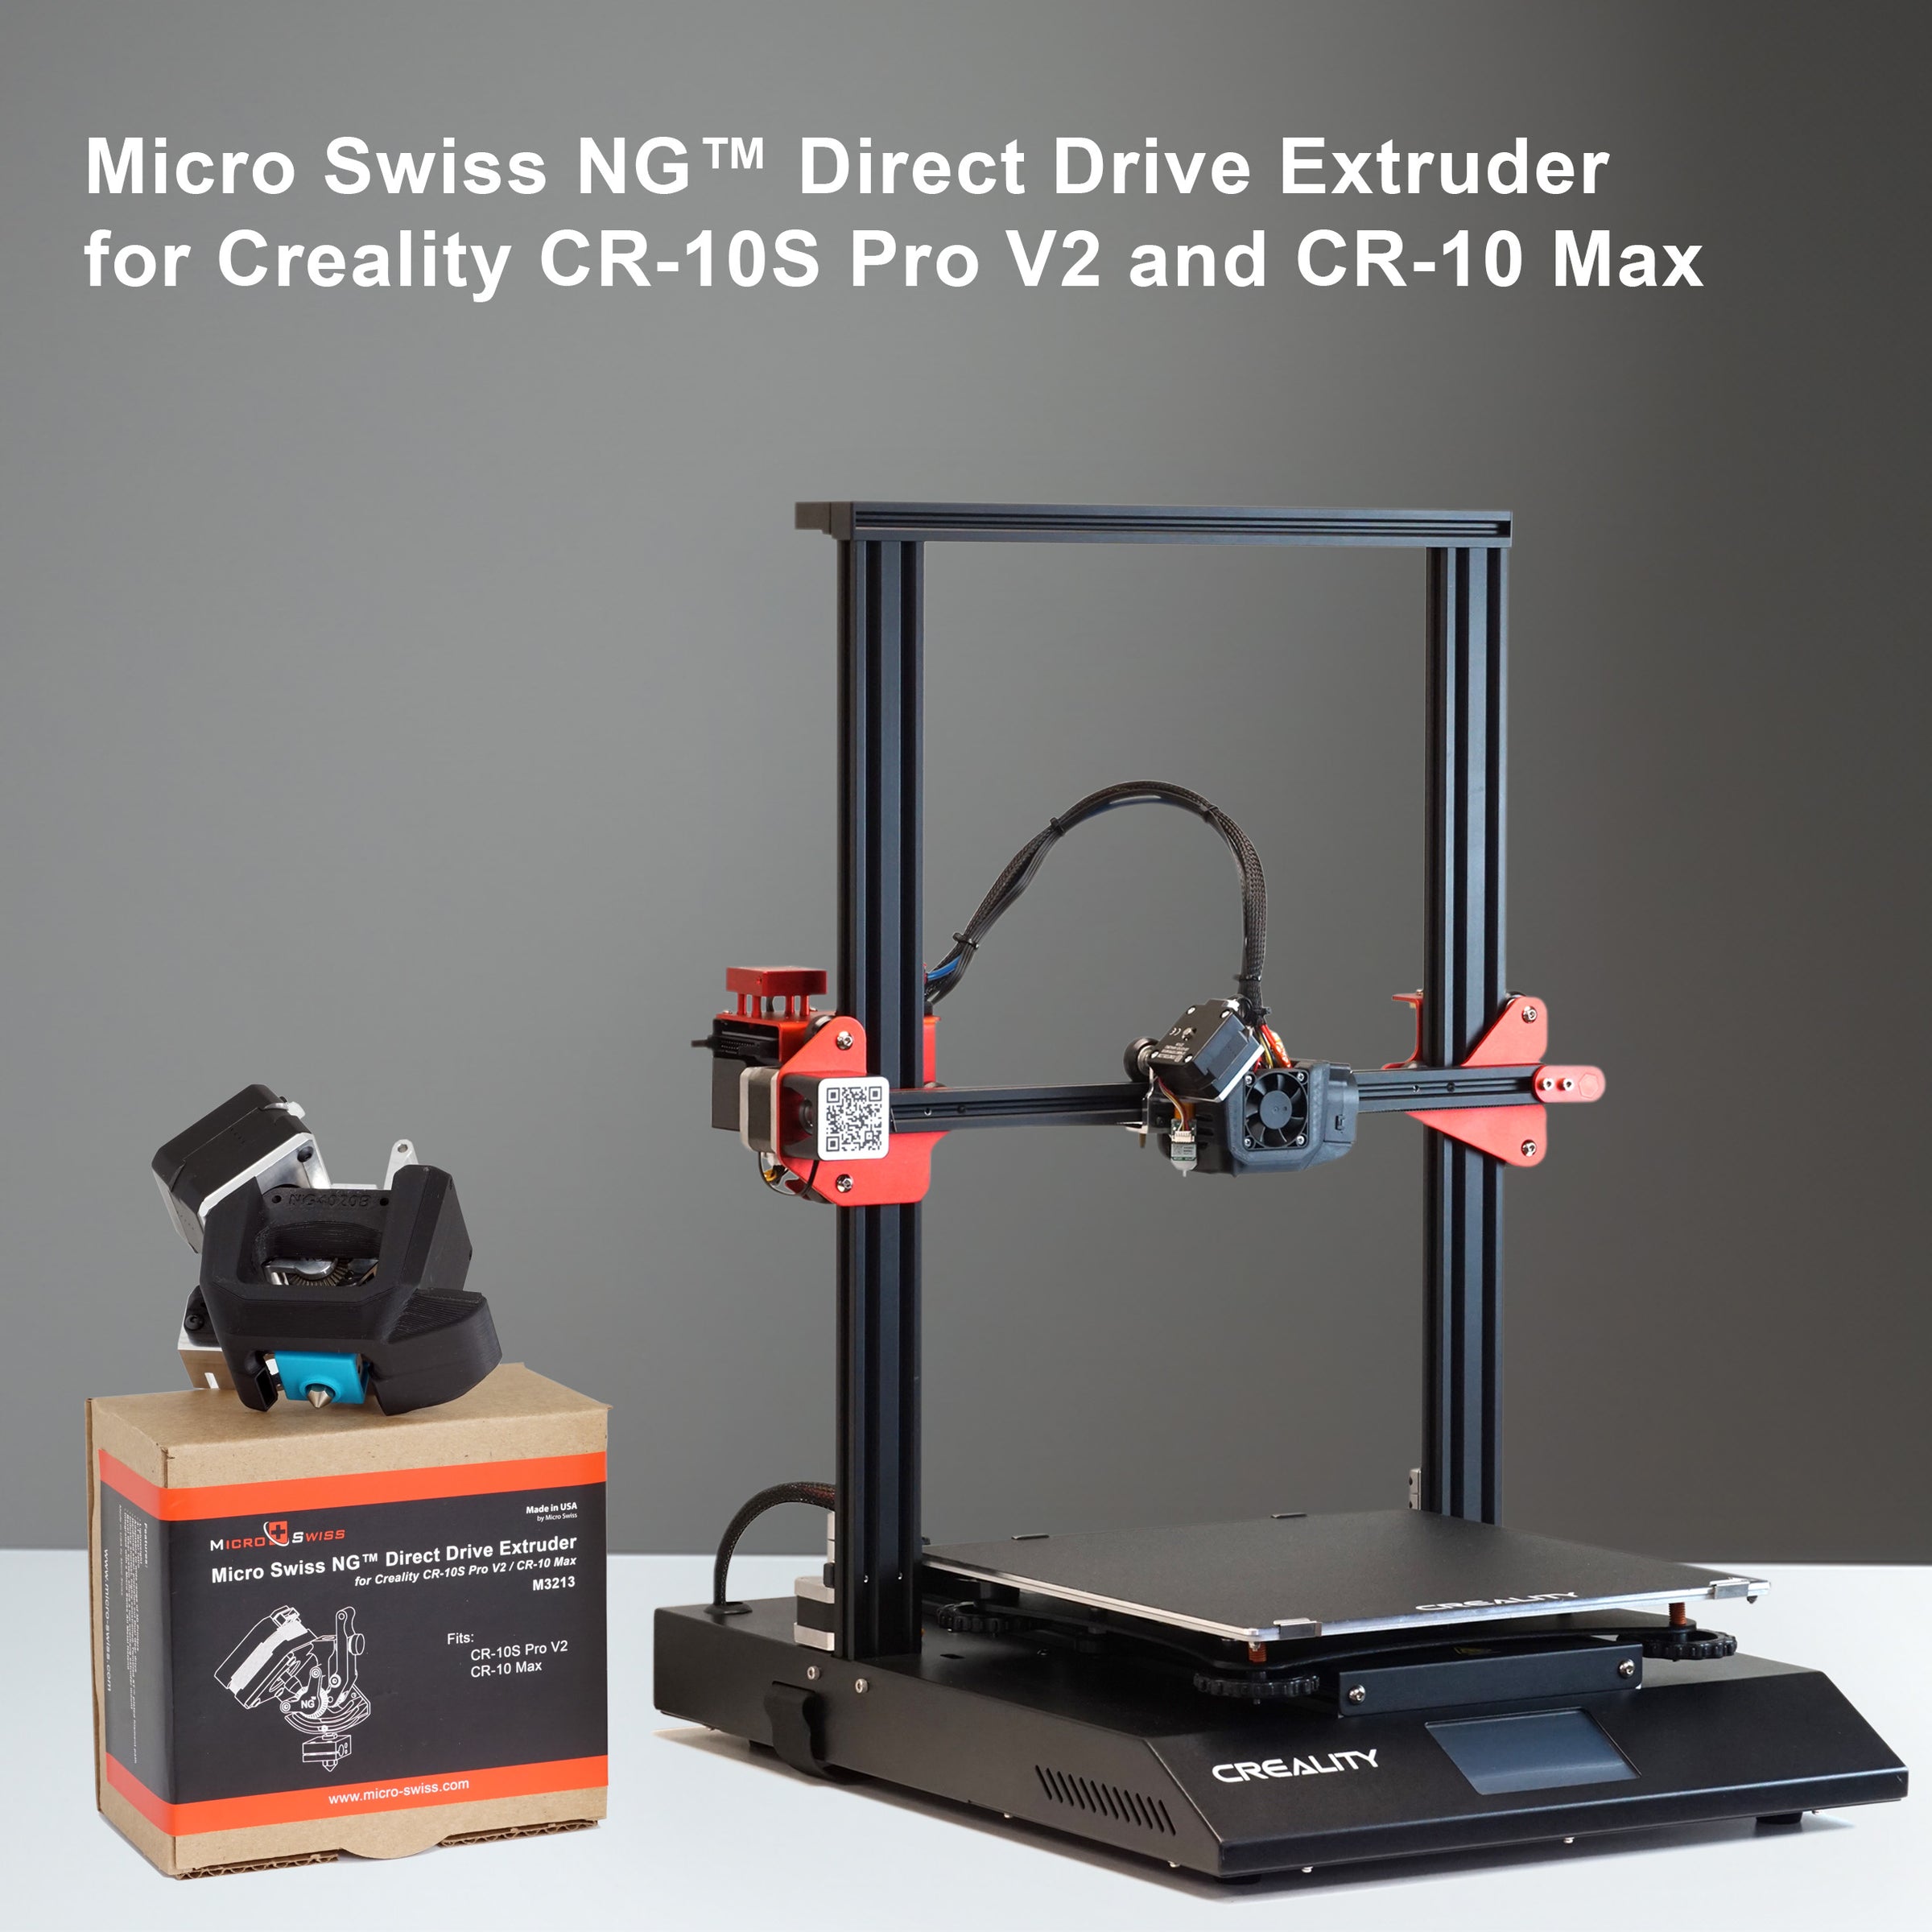 A Creality 3D printer with a Micro Swiss NG Direct Drive Extruder is displayed, featuring an All Metal Hotend for enhanced performance. Next to it is a box labeled "Micro Swiss NG Direct Drive Extruder for Creality CR-10S Pro V2 and CR-10 Max," showcasing an image of the extruder.